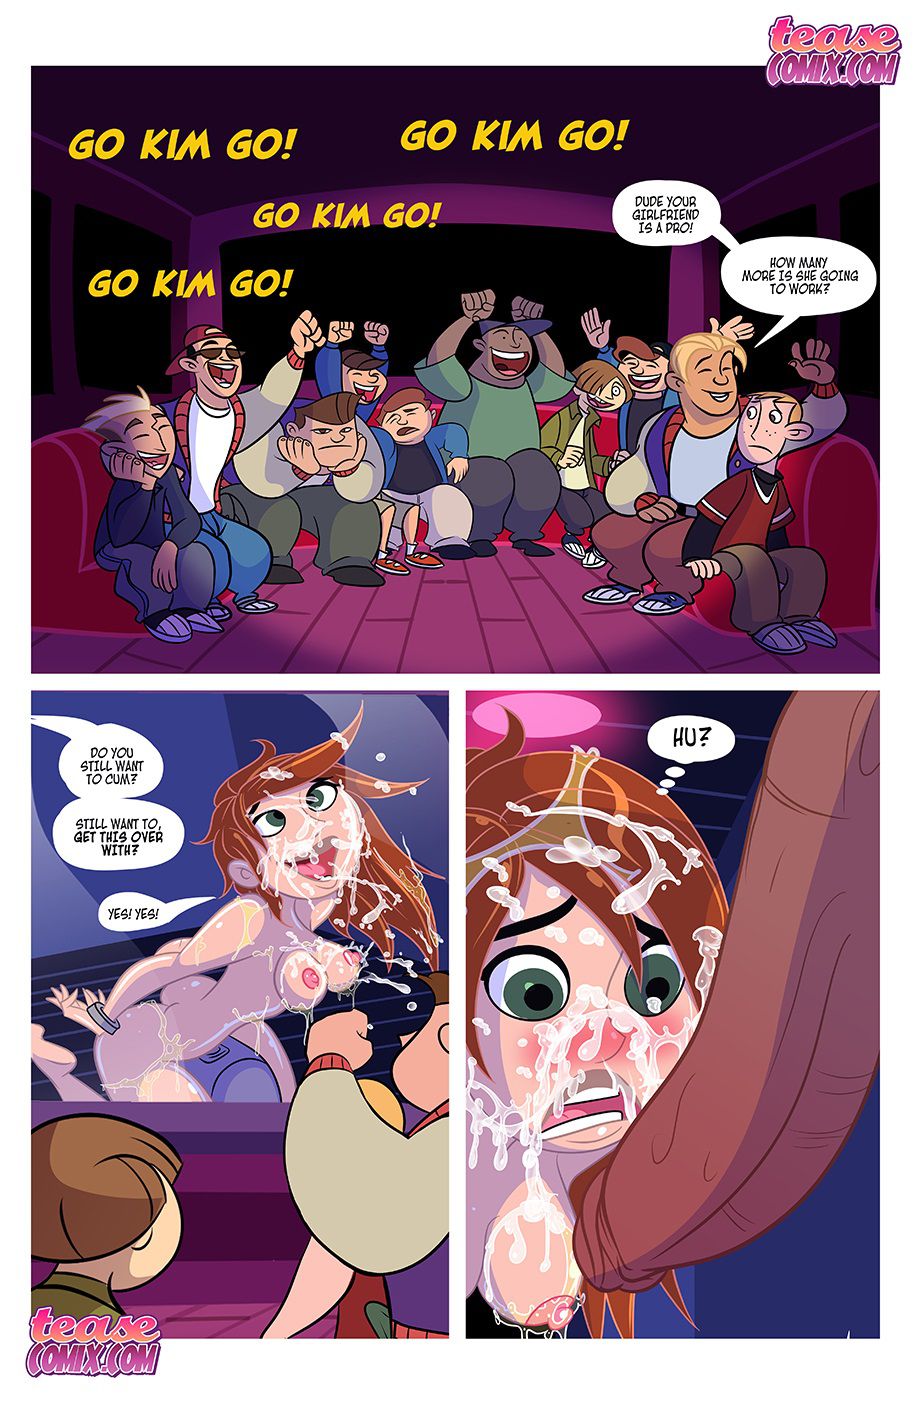 [Tease Comix] Cheer Fight (Kim Possible) 52